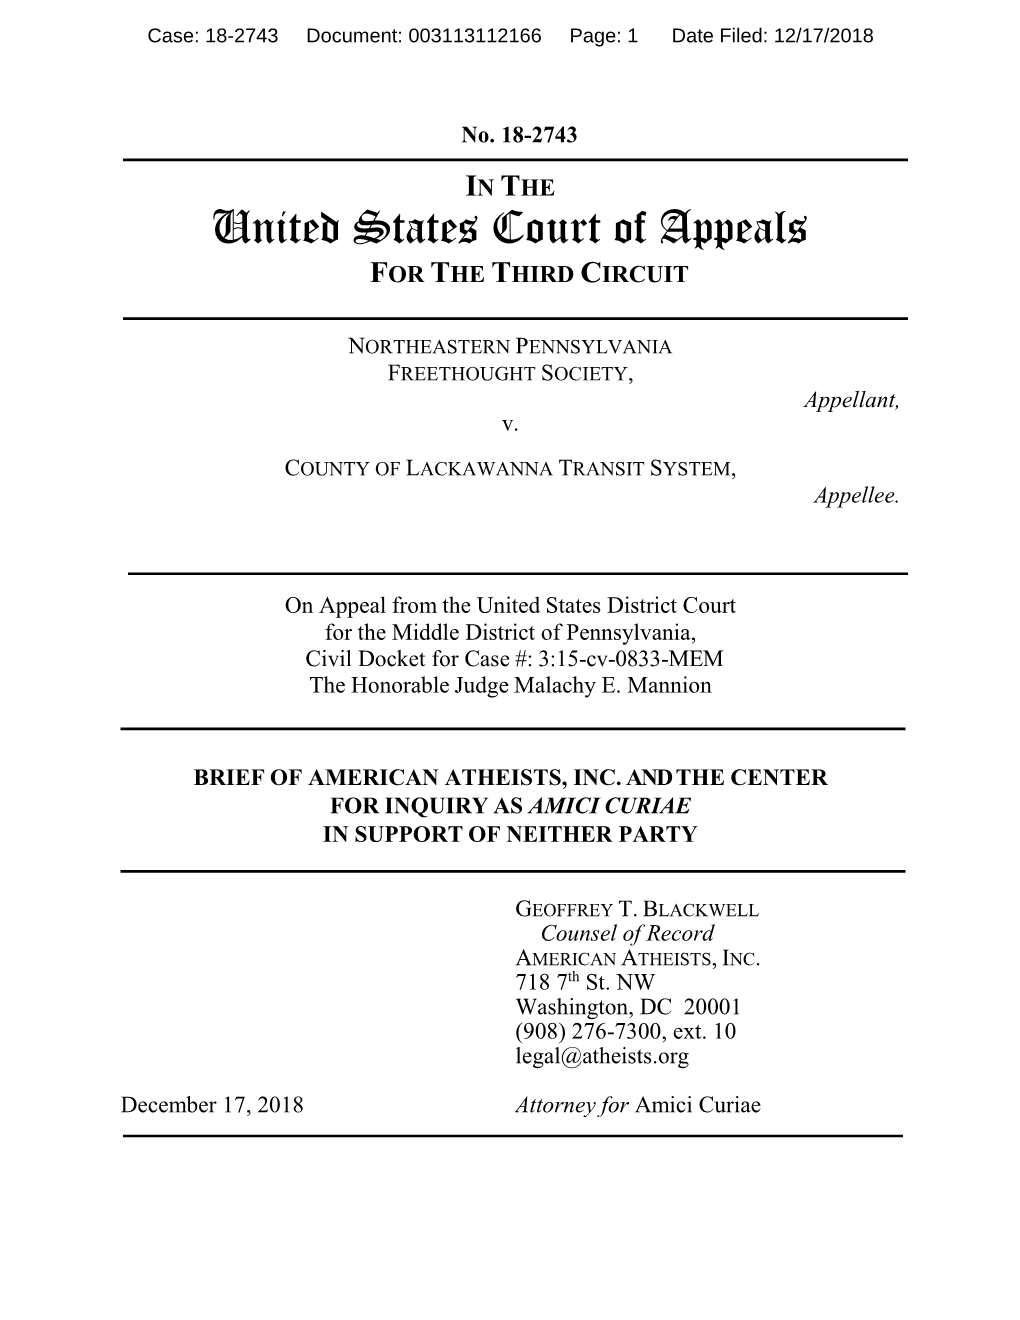 United States Court of Appeals for the THIRD CIRCUIT